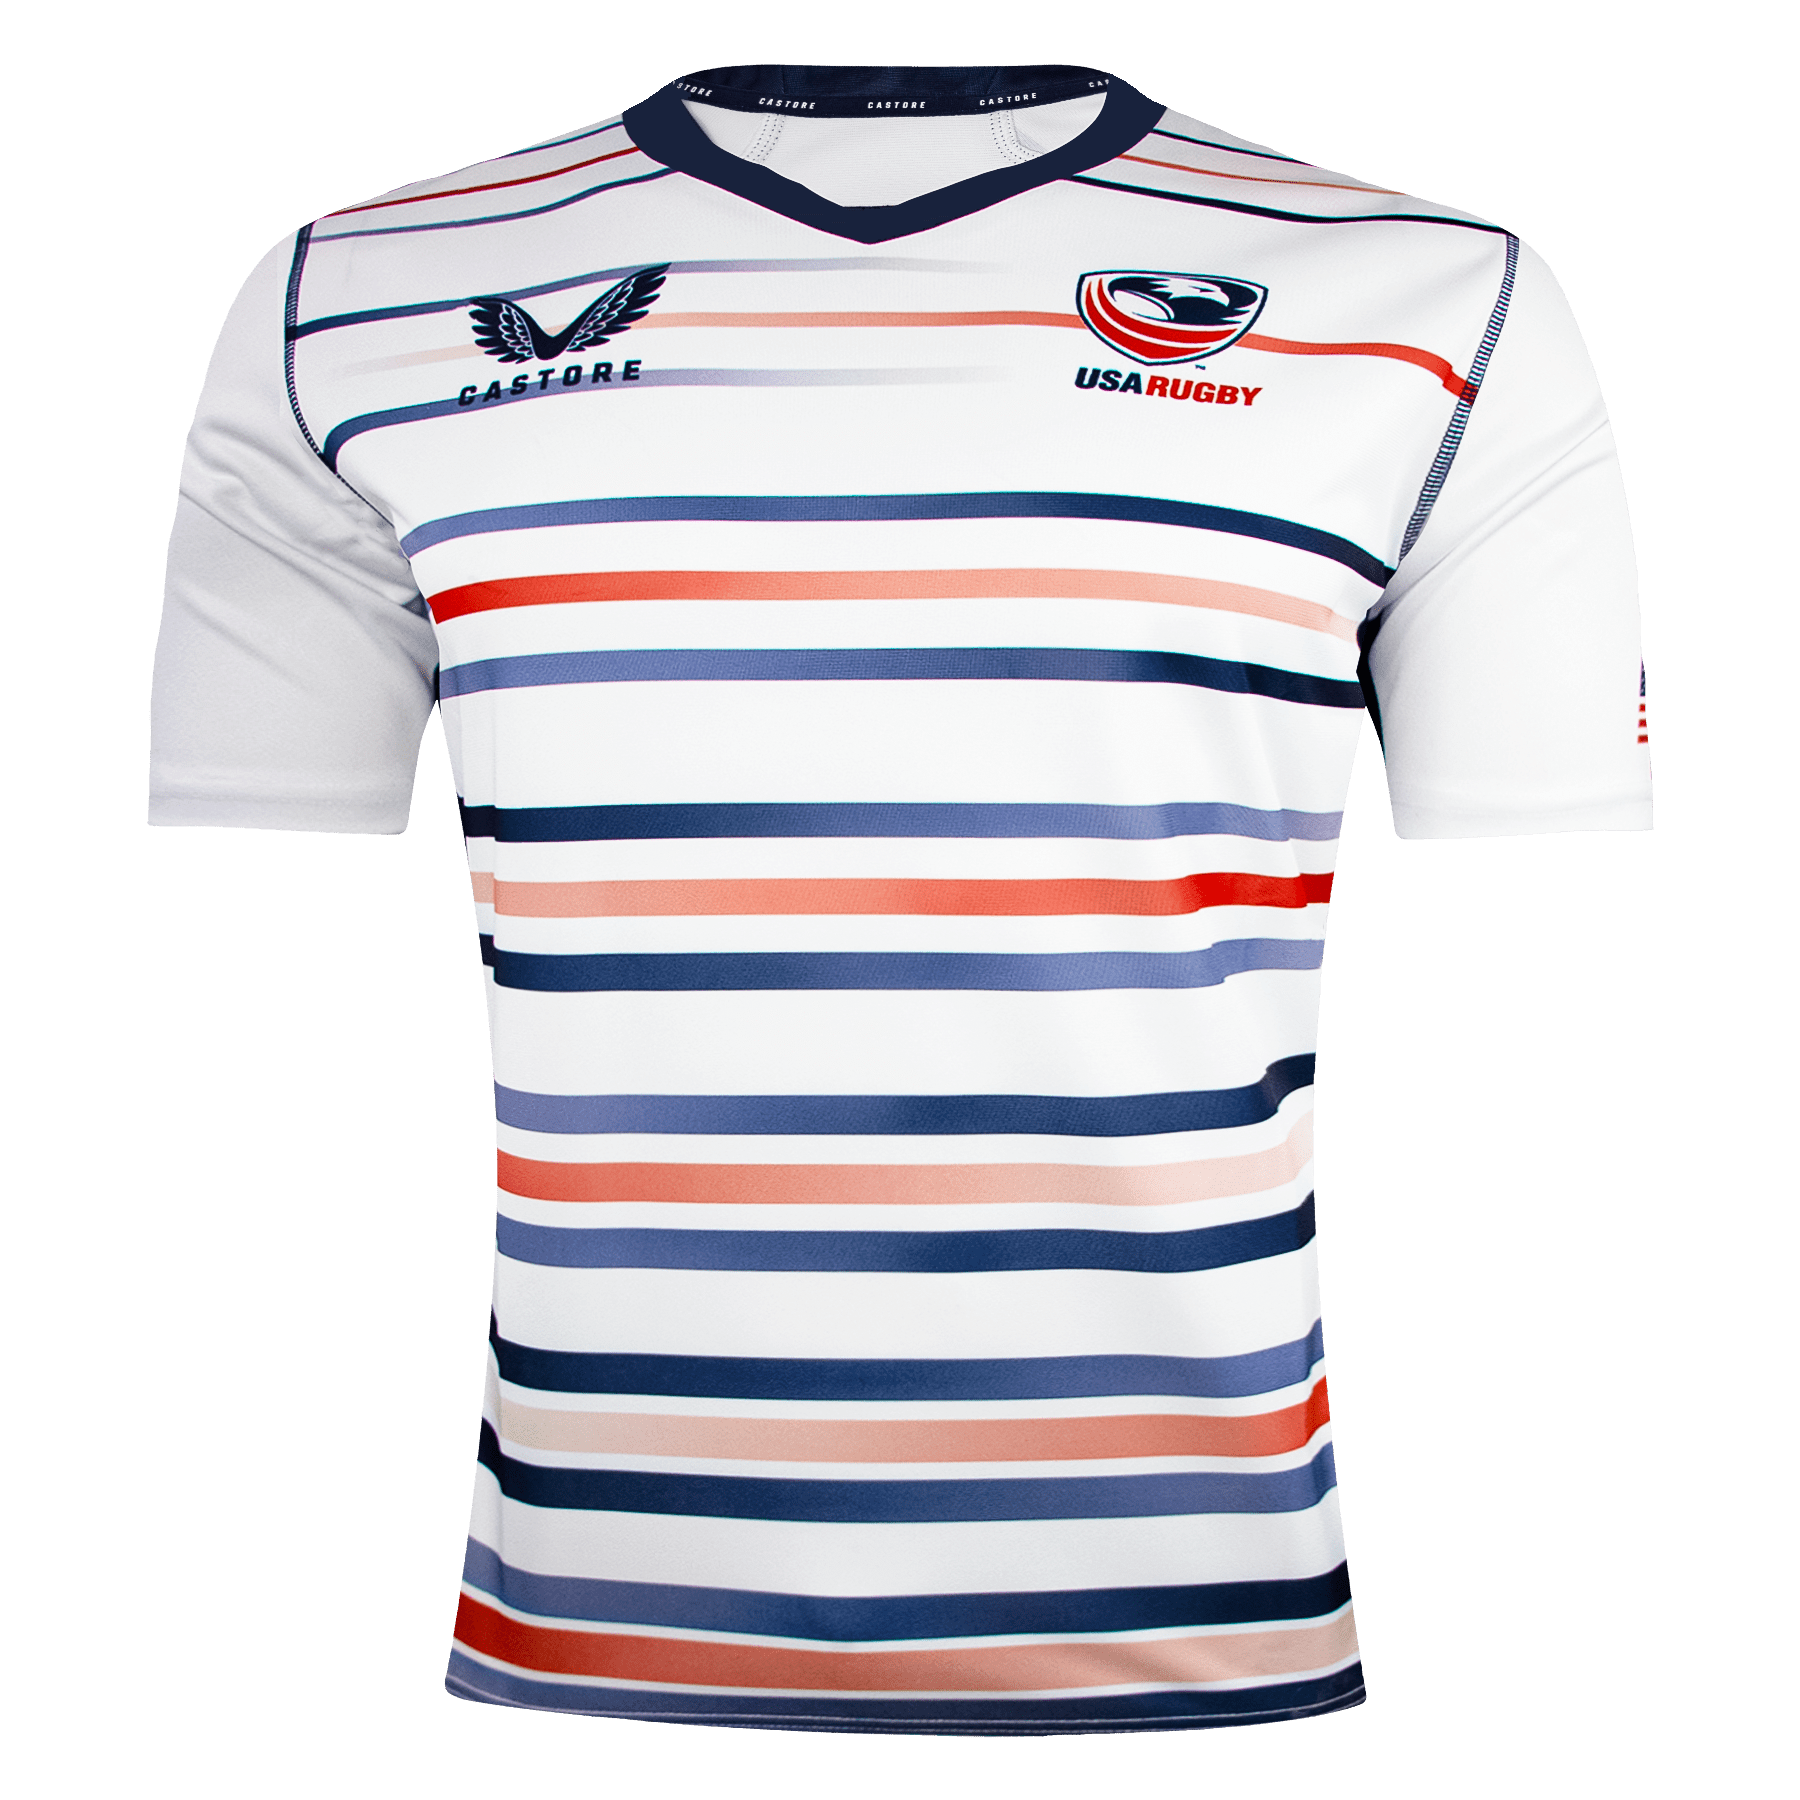 USA Rugby Men's Home Jersey 22/23 by Castore - World Rugby Shop